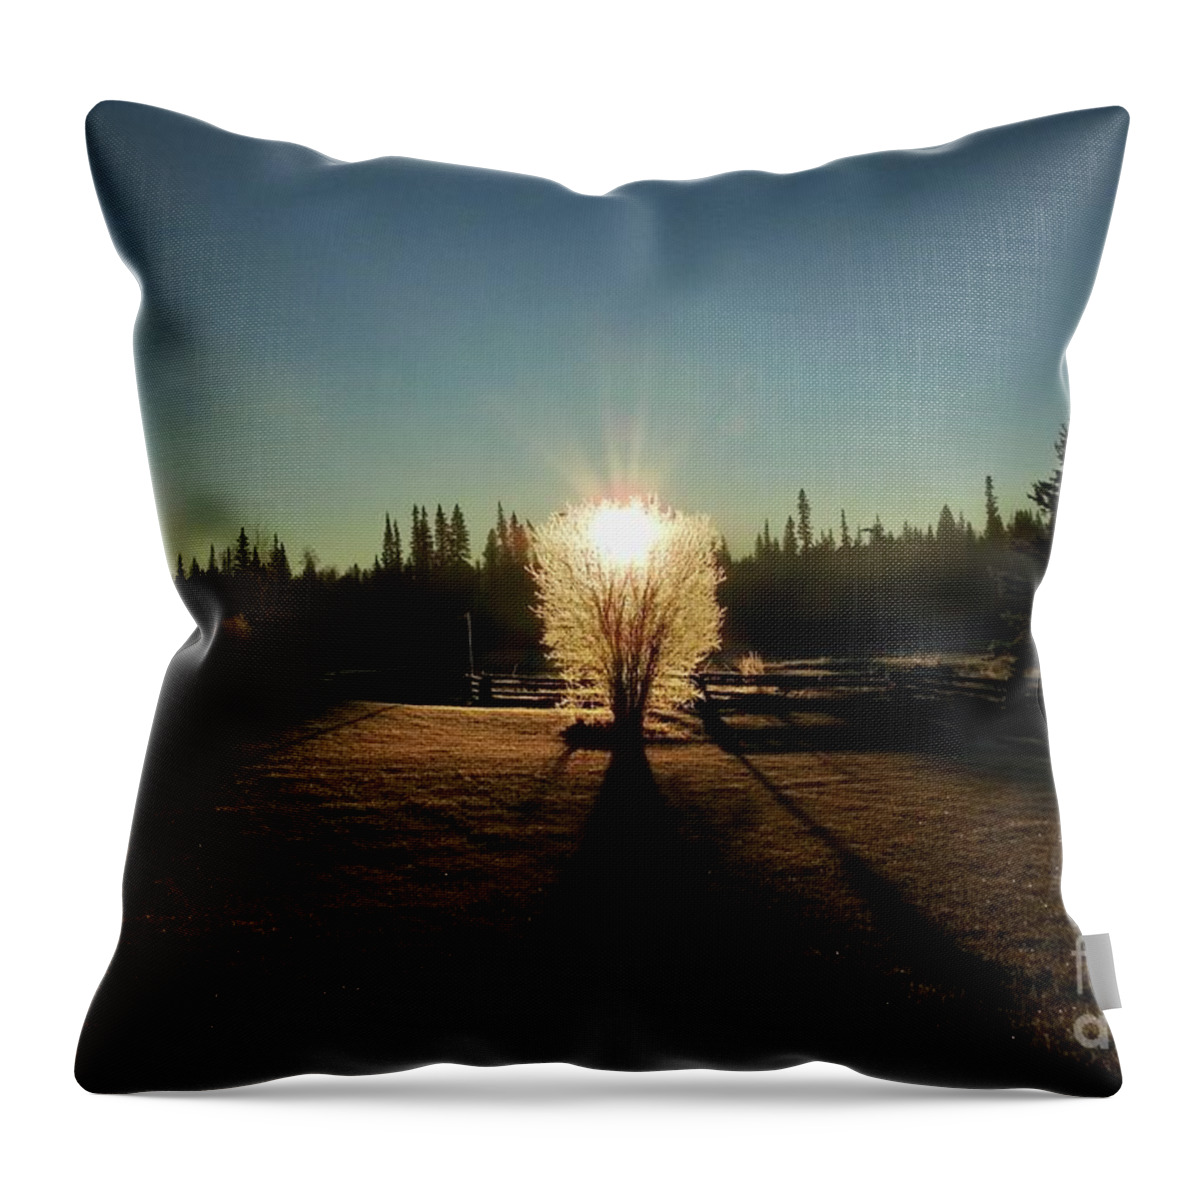 Sunrise Throw Pillow featuring the photograph Sunrise by Nicola Finch